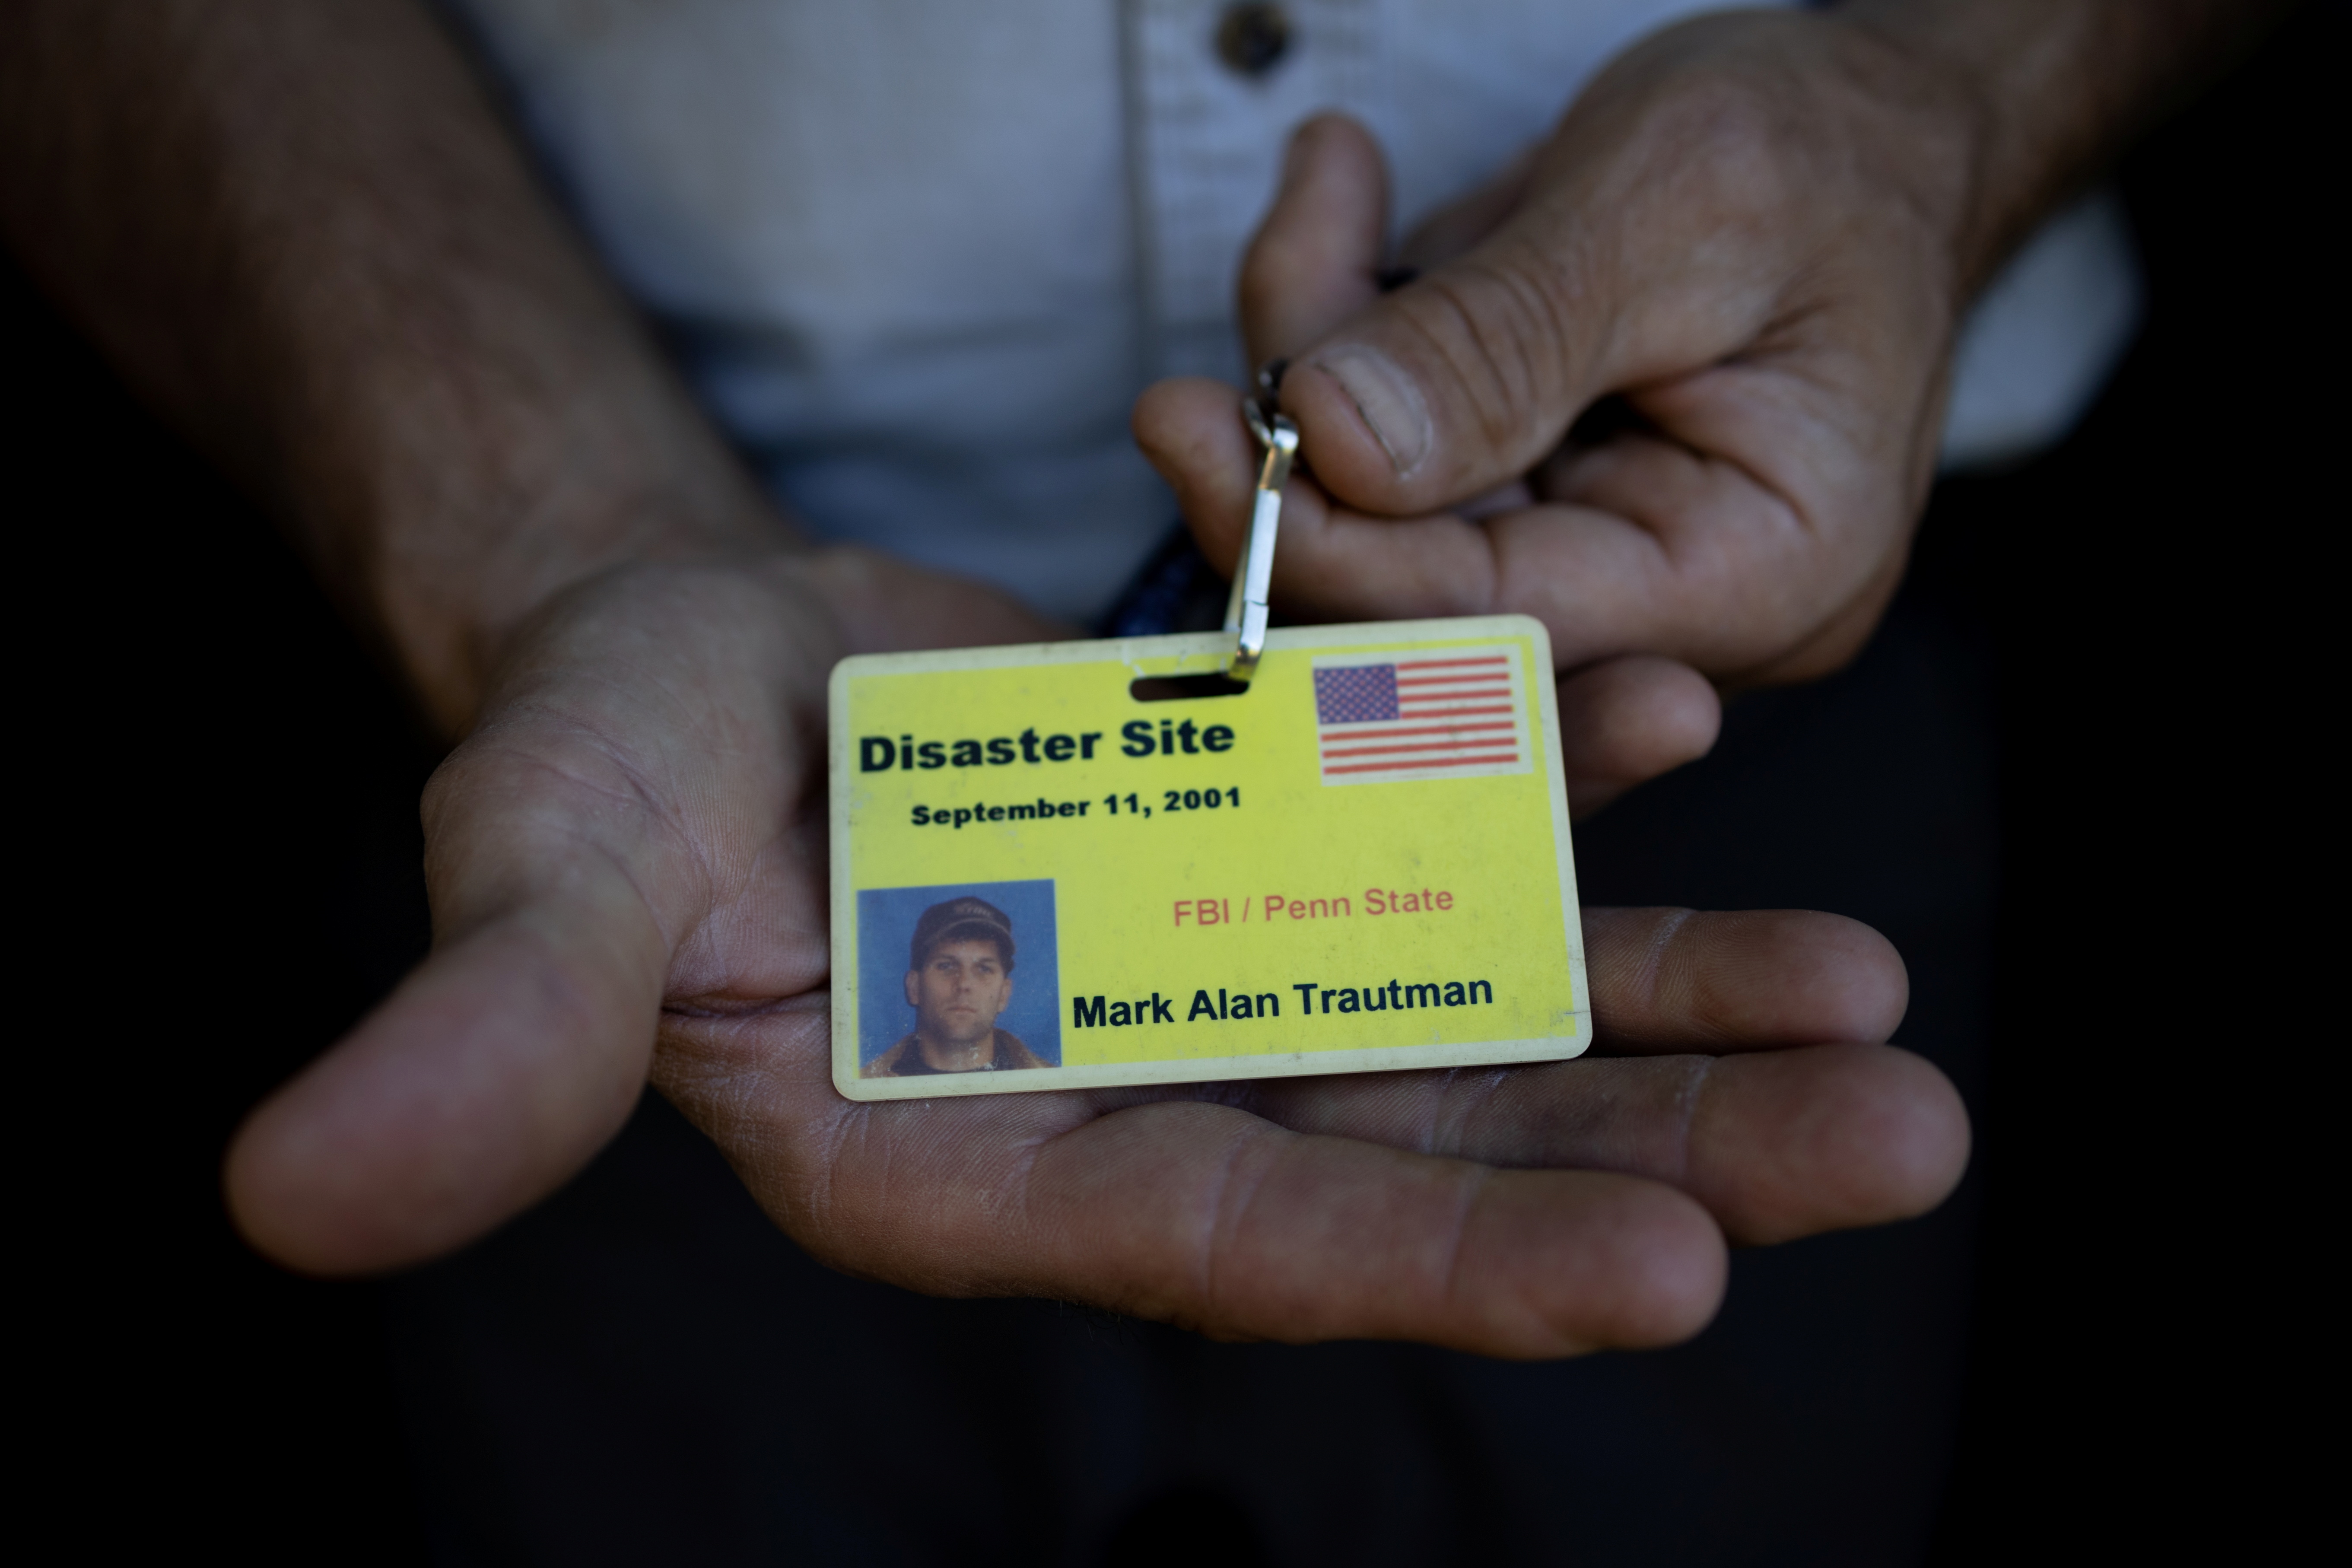 Arborist Mark Trautman holds his badge from when he was on site during 9/11, at his home in Spruce Creek, Pennsylvania. REUTERS/Hannah Beier